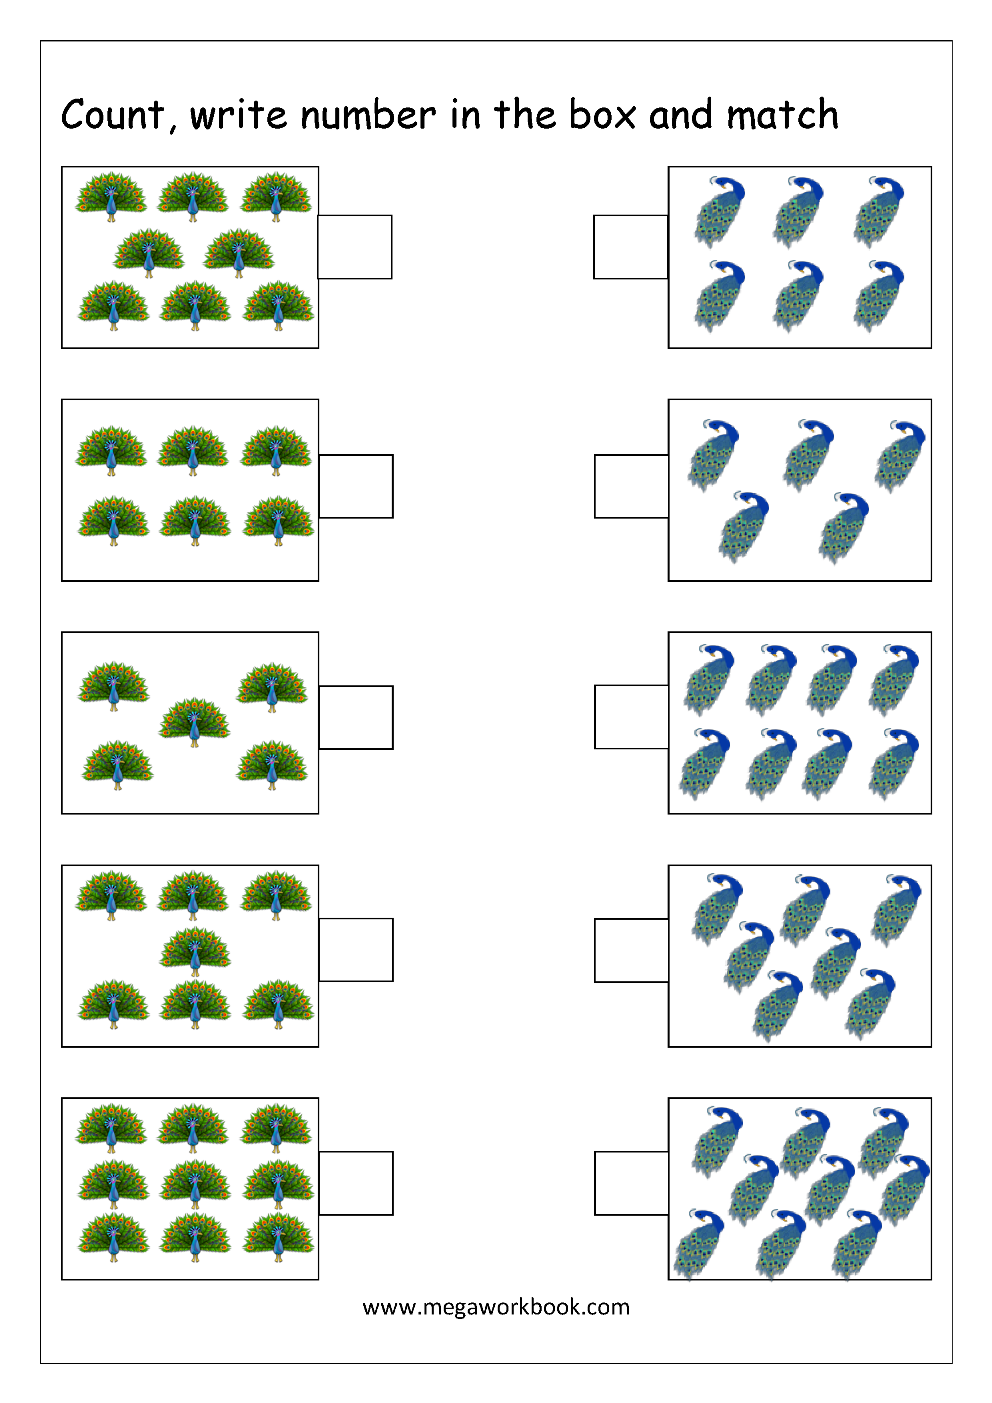 free-printable-number-matching-worksheets-for-kindergarten-and